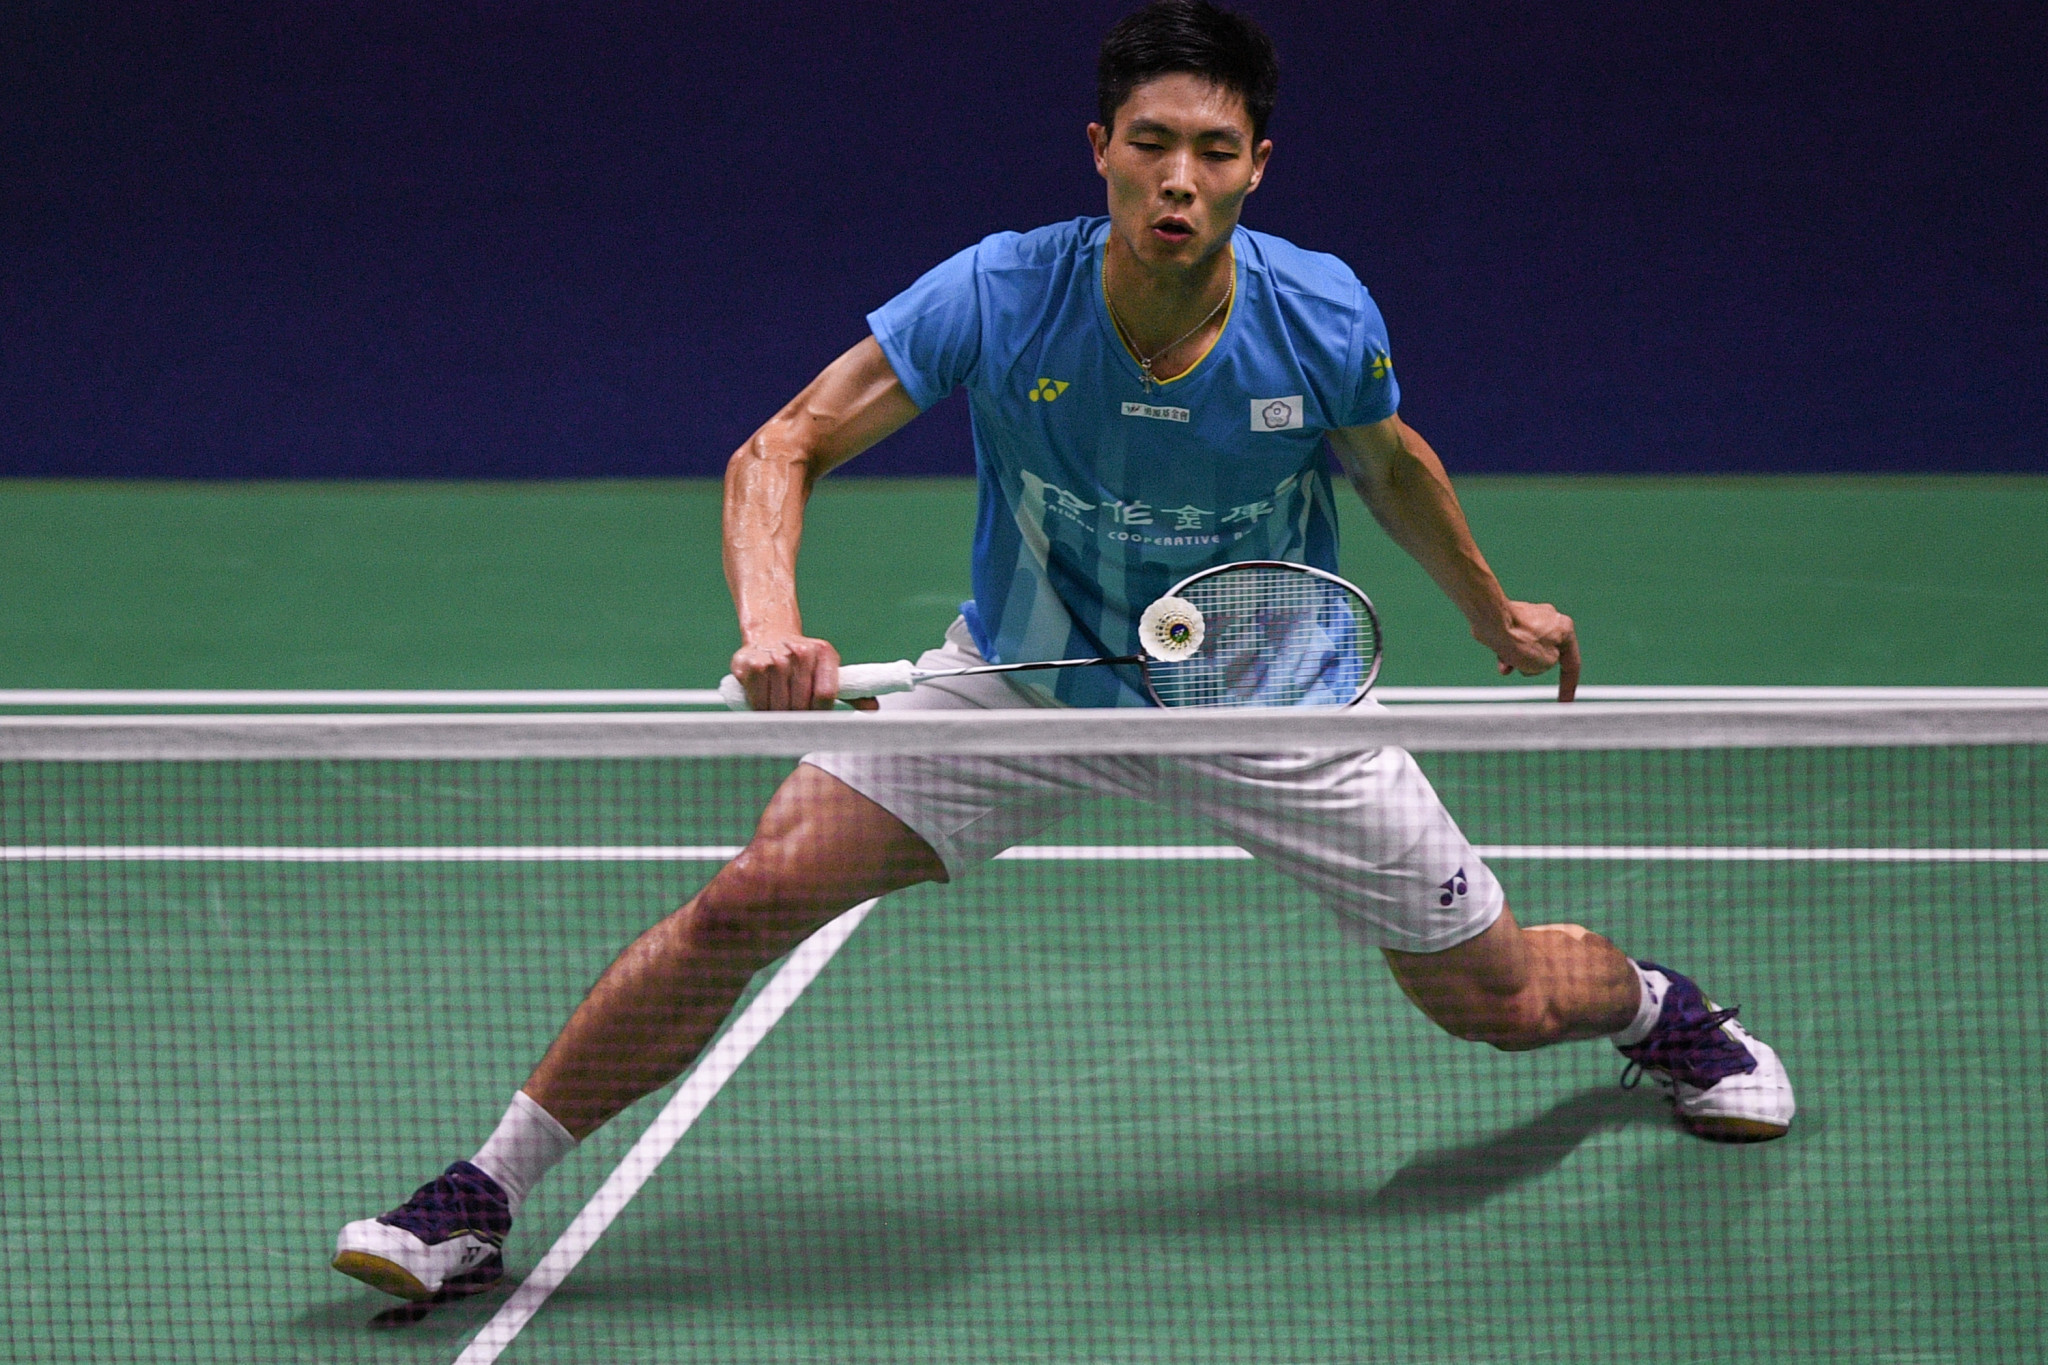 Second seed Chou Tien-chen was given a tough workout by Denmark's Hans-Kristian Vittinghus ©Getty Images